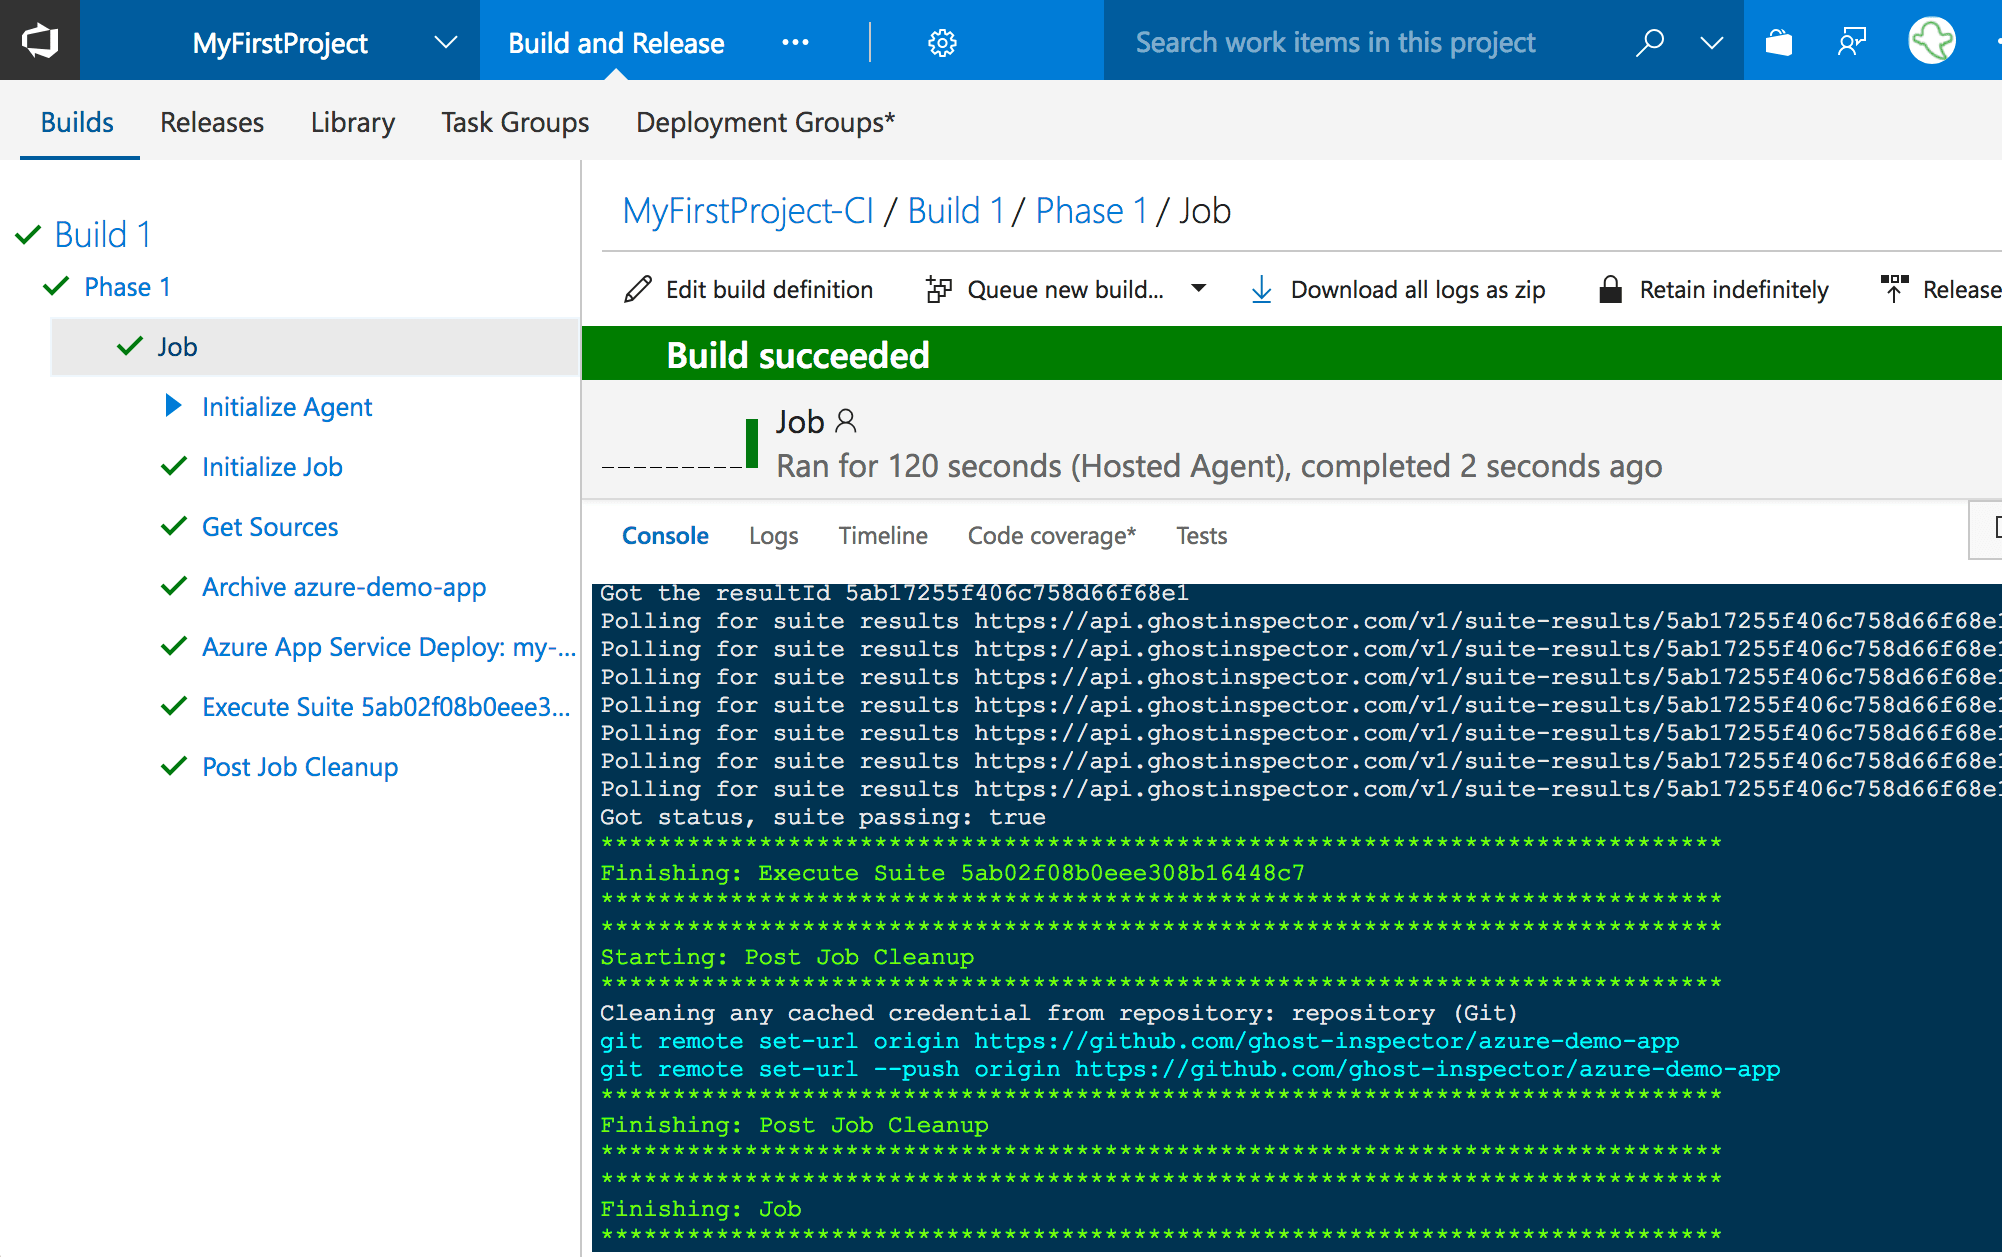 The VSTS build logs